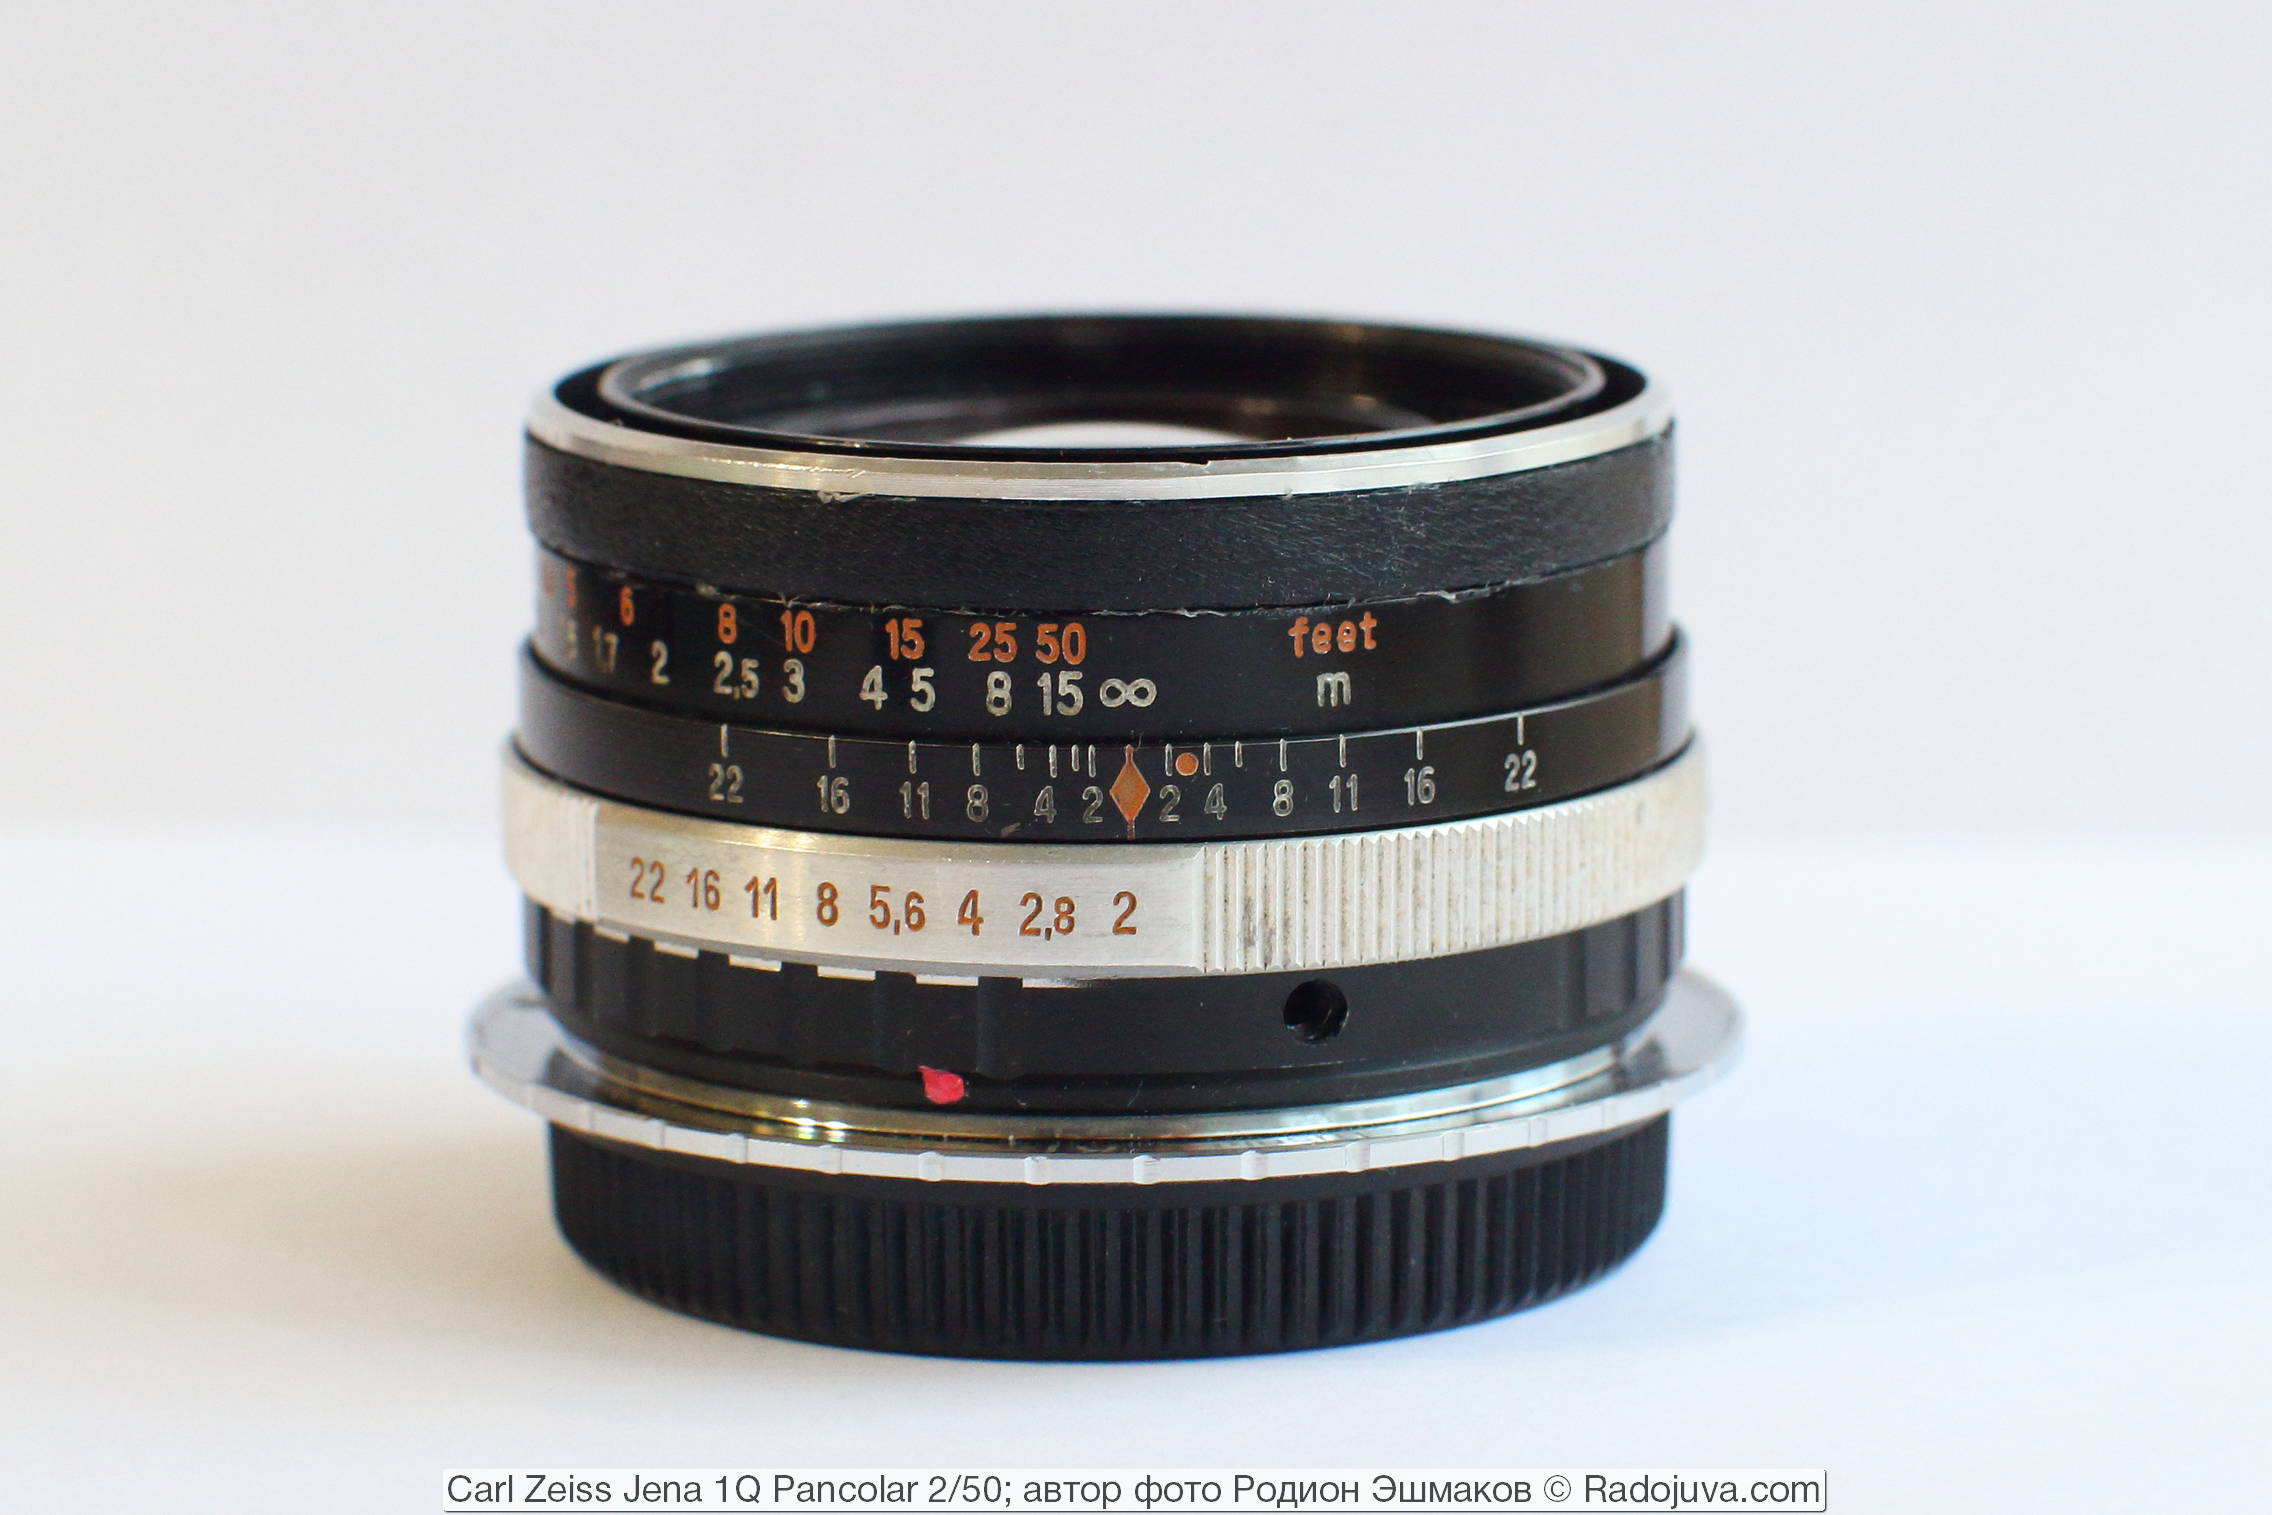 Lens when focusing on infinity.